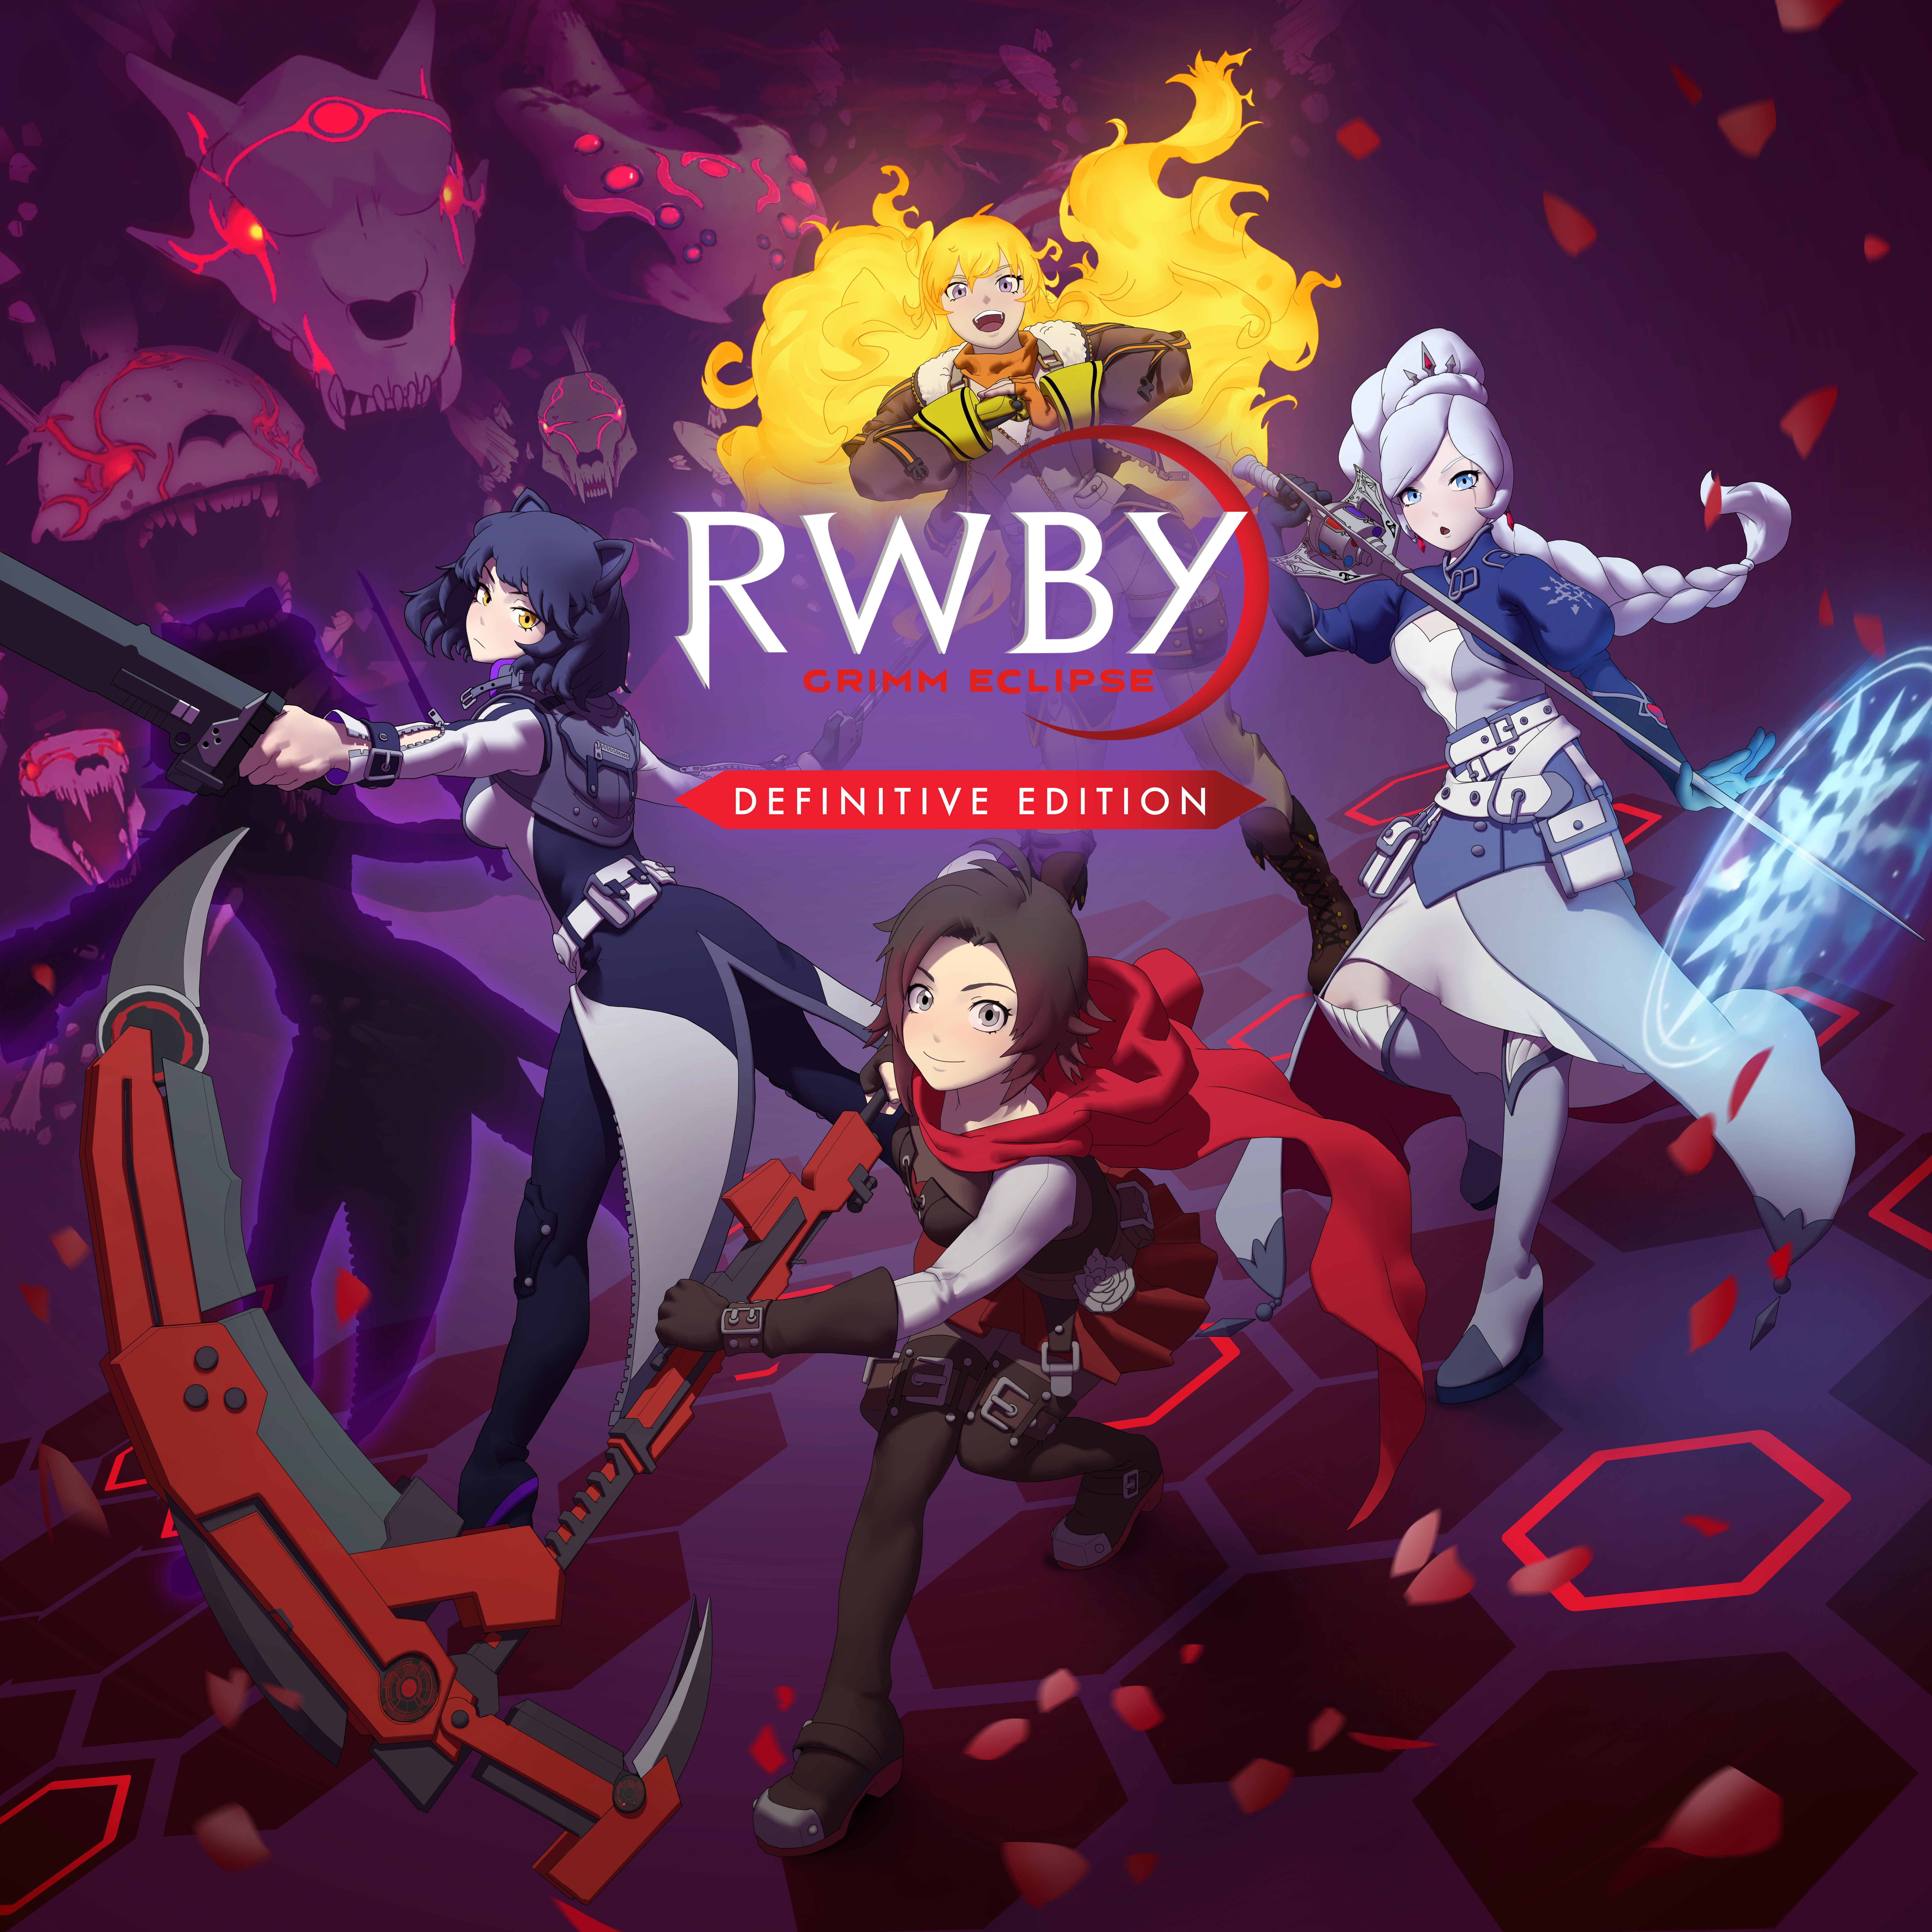 Rwby Grimm Eclipse Definitive Edition Coming To Switch On May 13 Gematsu